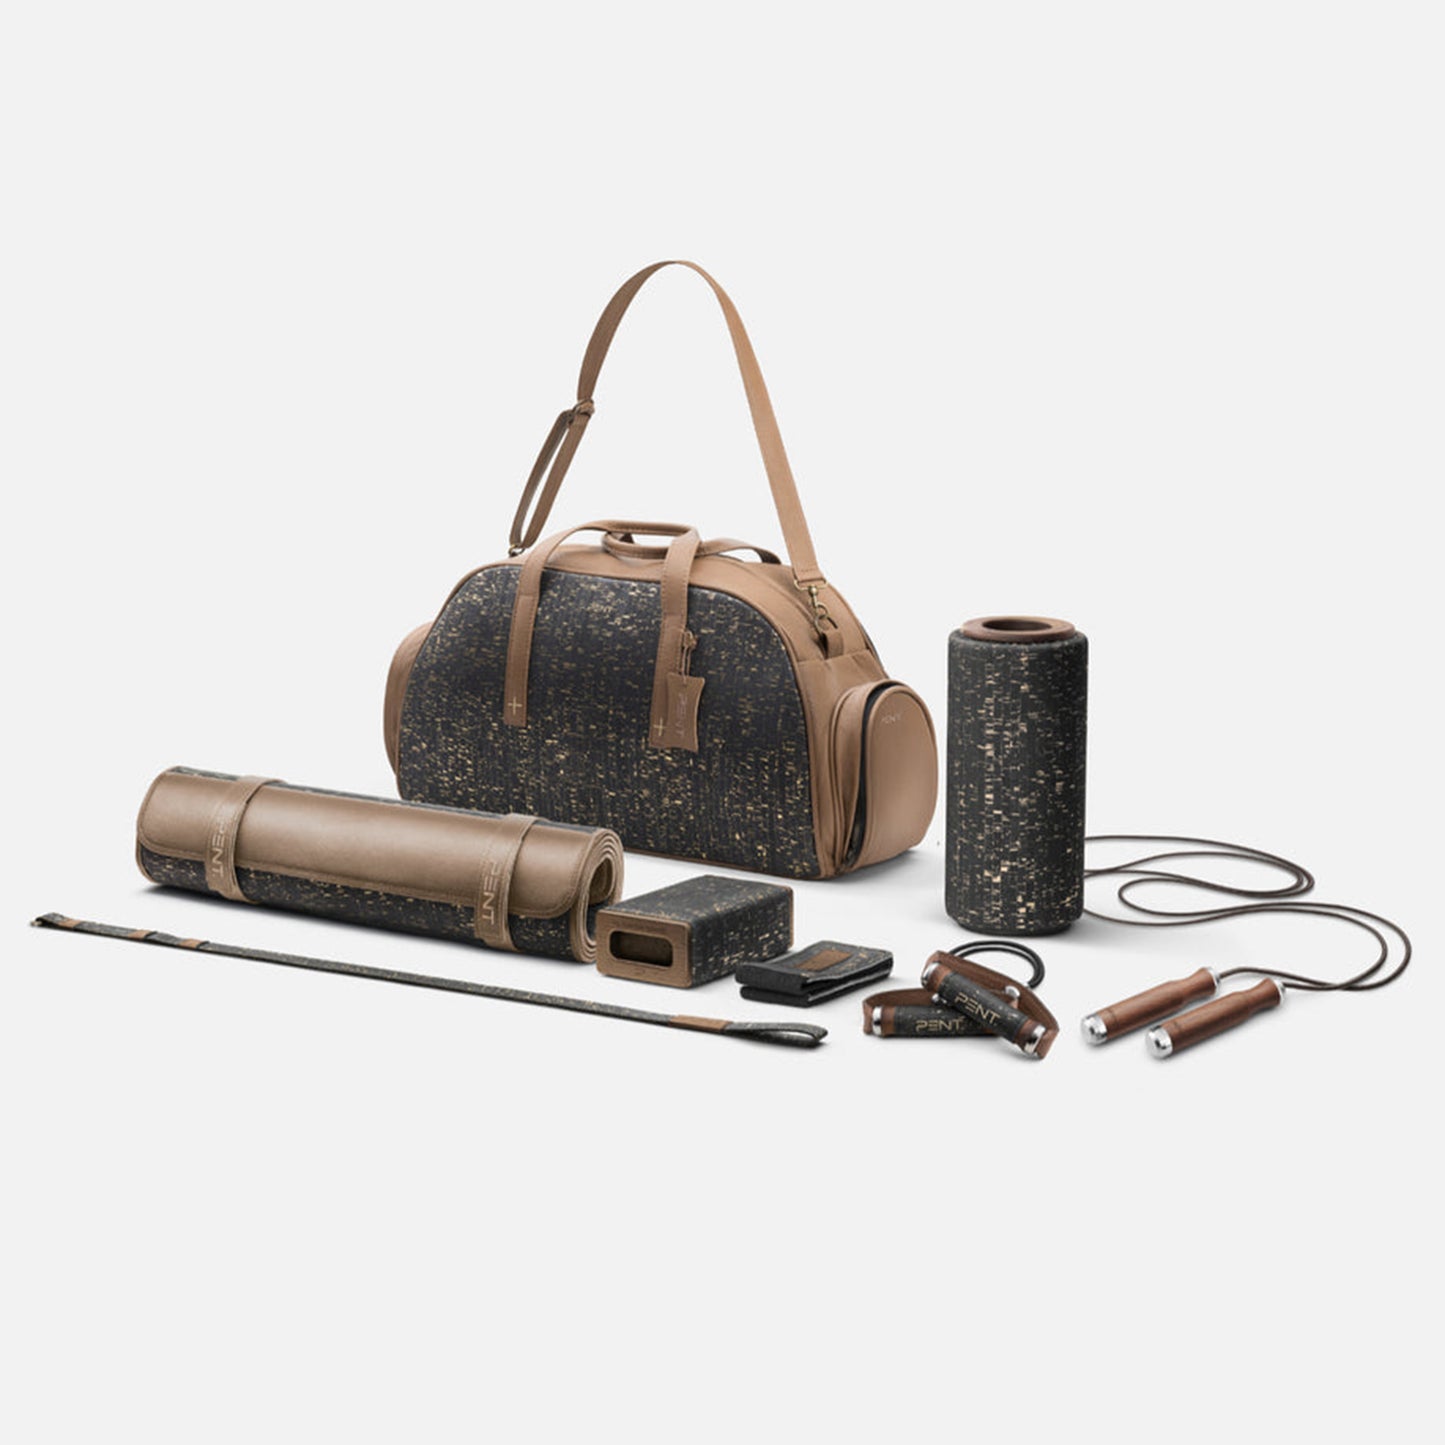 TORBA Set - Luxury Fitness Bag with Fitness Accessories